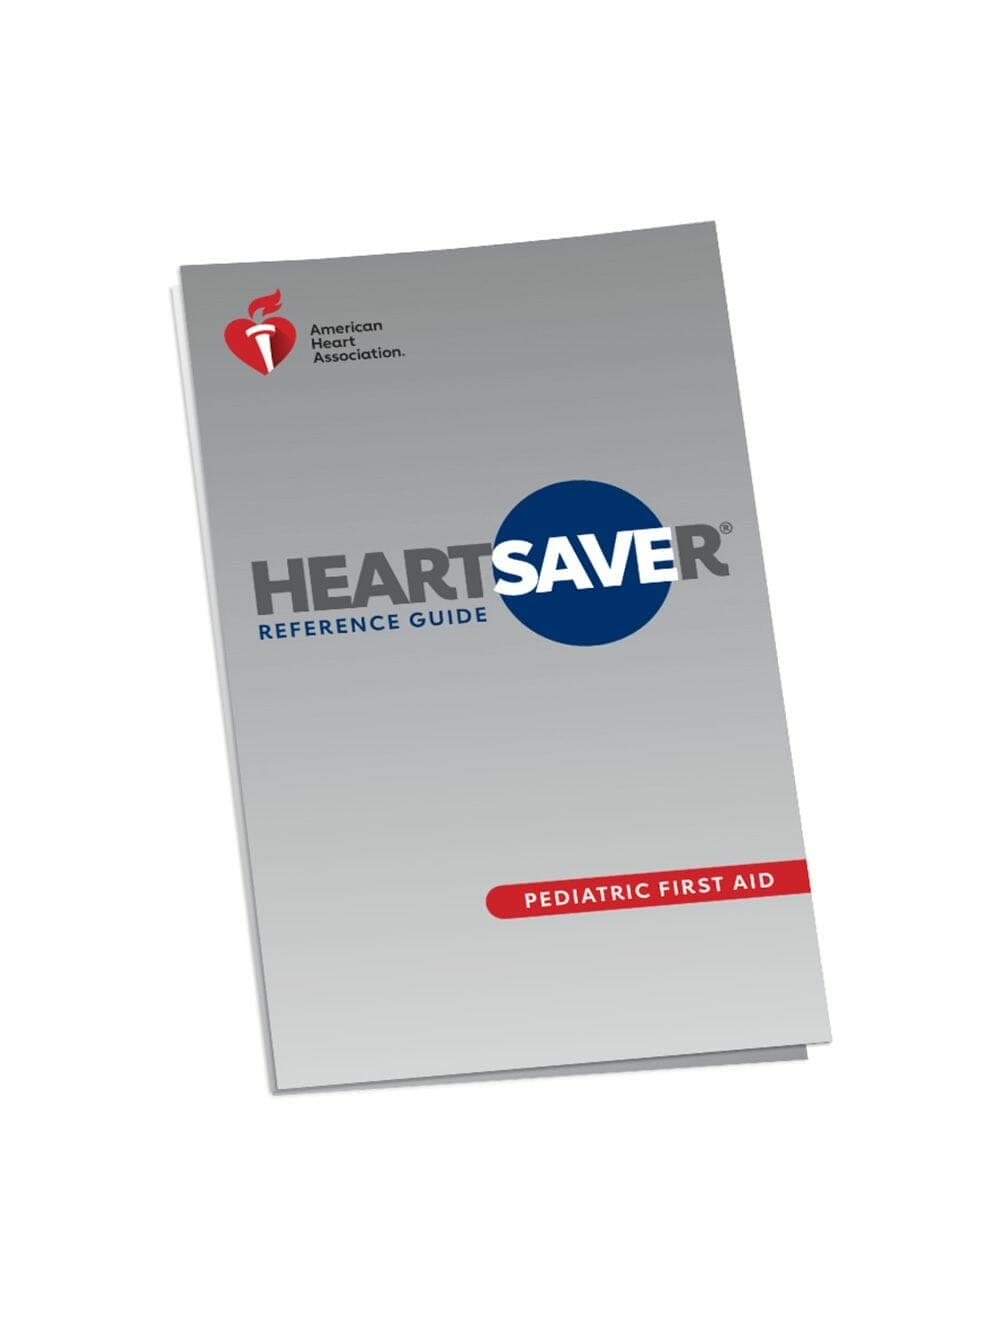 2020 AHA Heartsaver® Pediatric First Aid Reference Guide